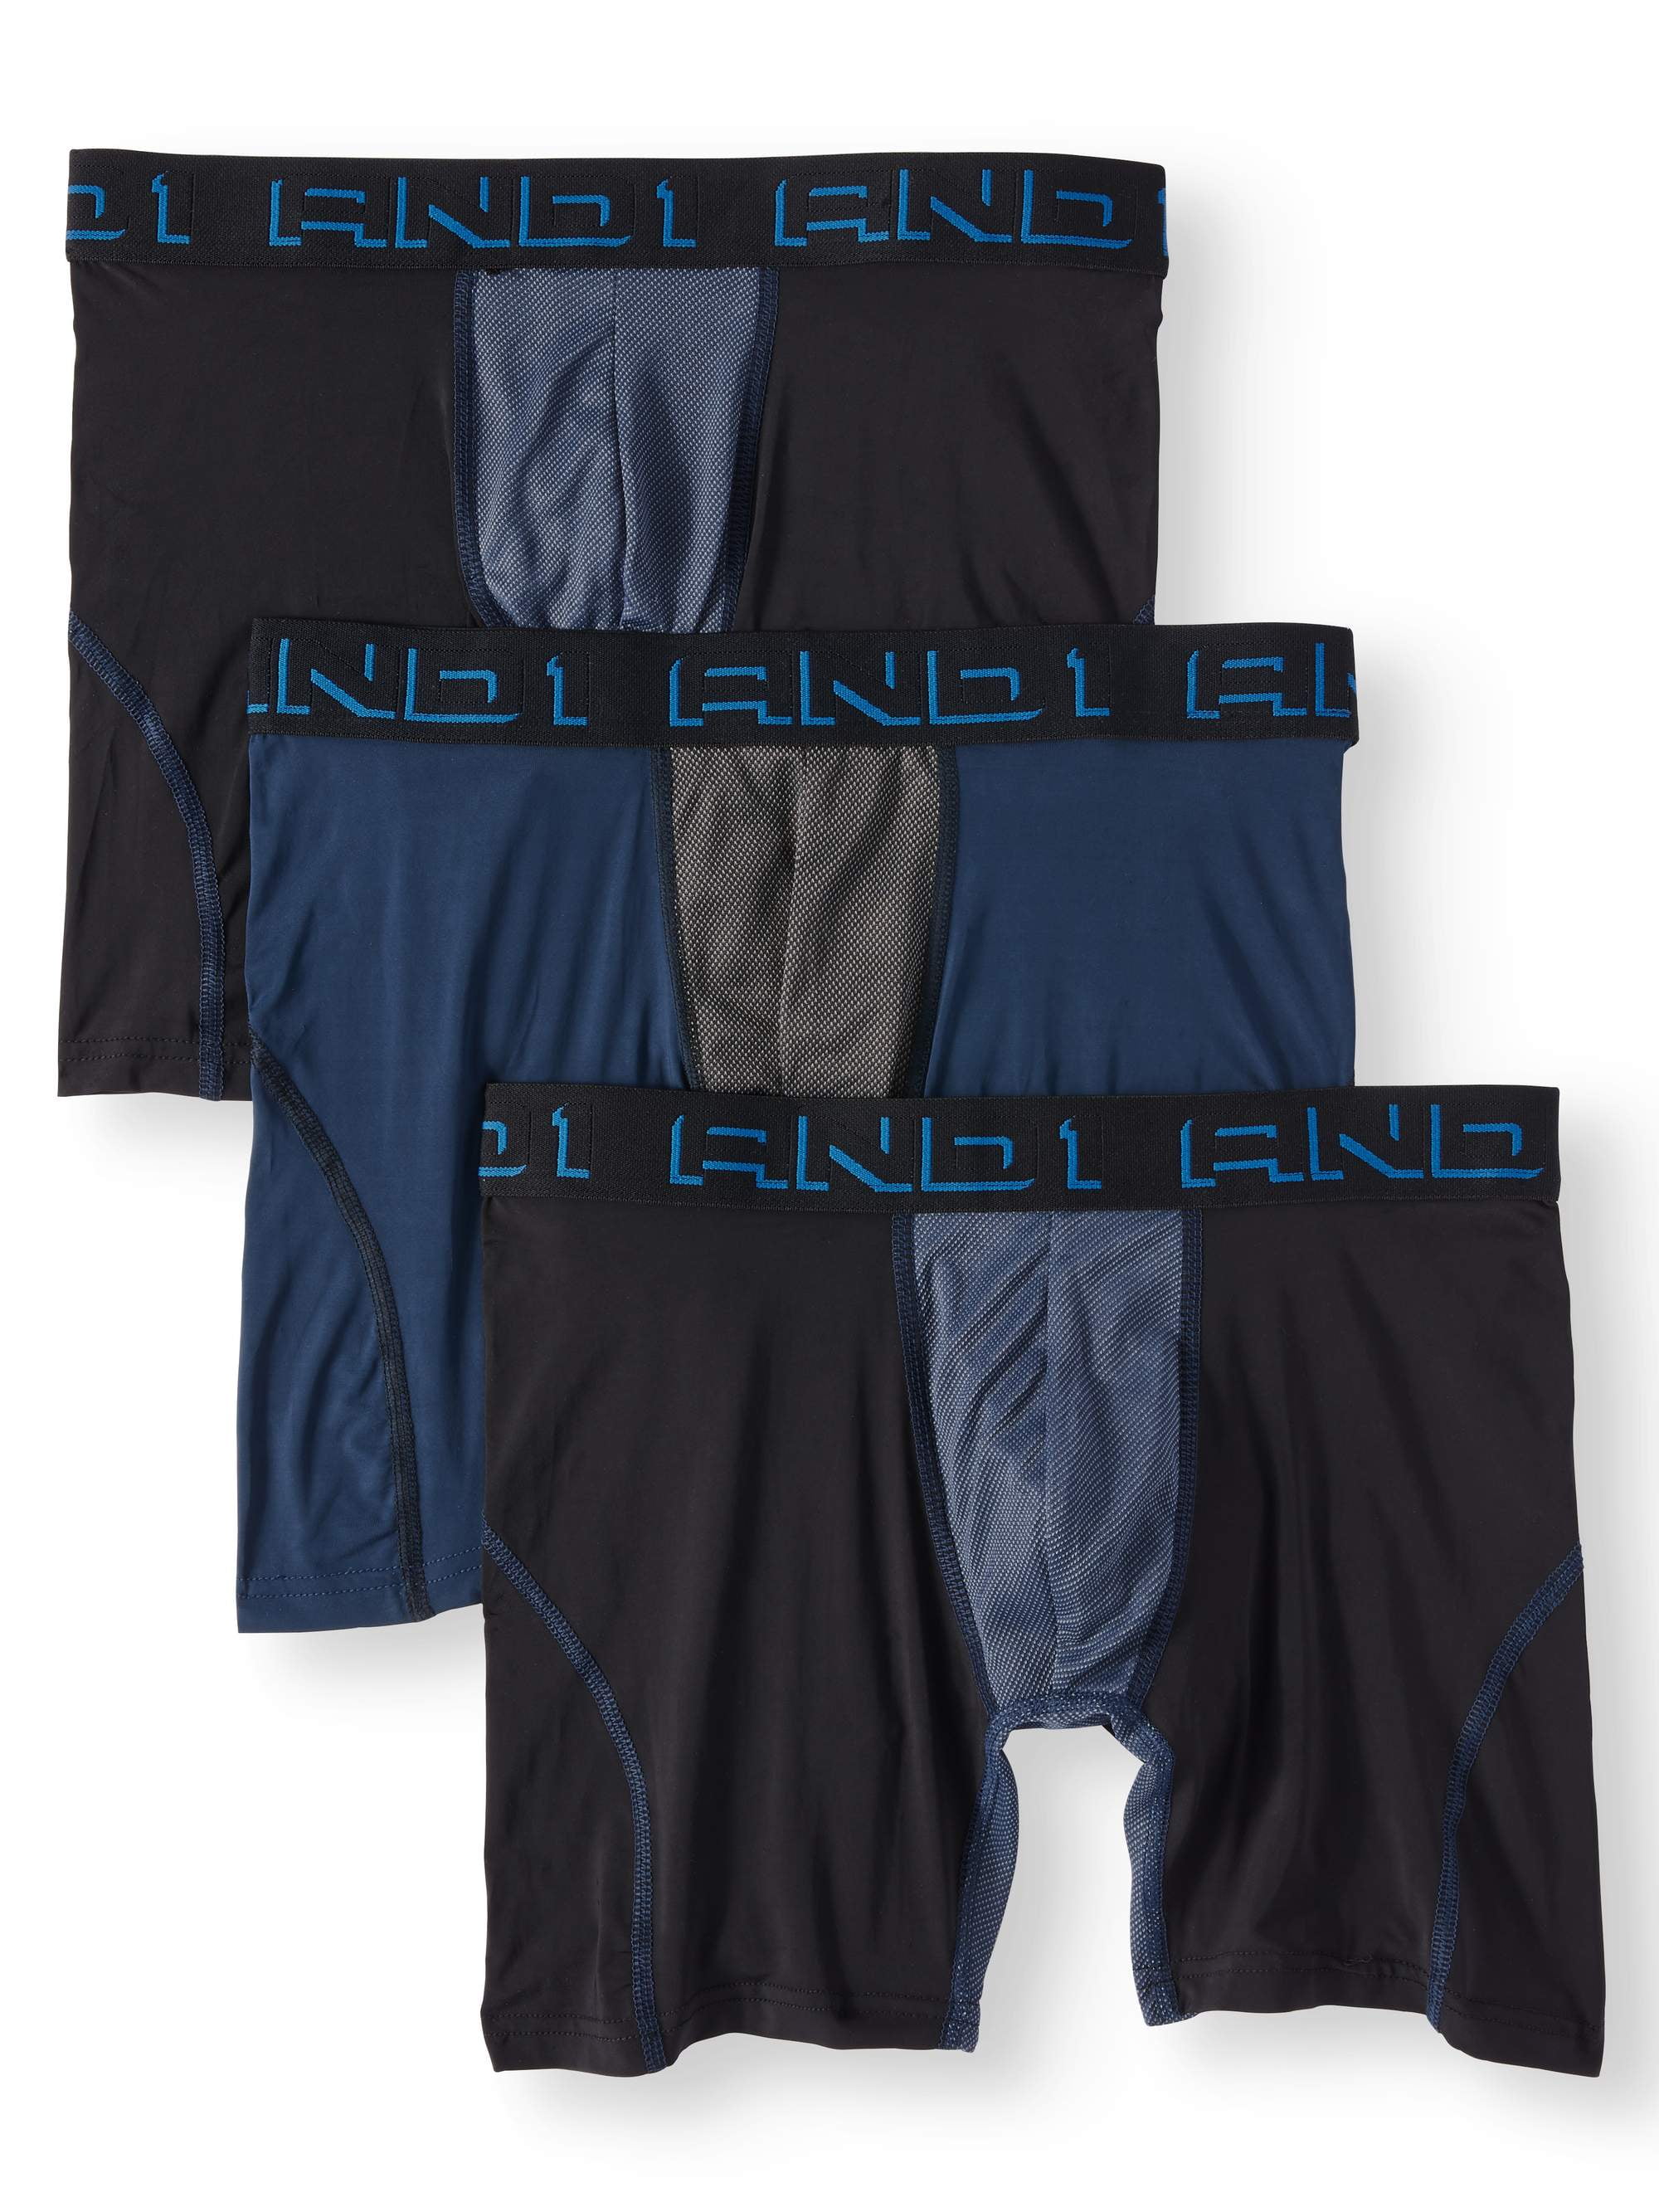 AND1 Assorted 9 Inseam 6 Pack ProPlatinum Performance Boxer Briefs - 3XL :  : Clothing, Shoes & Accessories